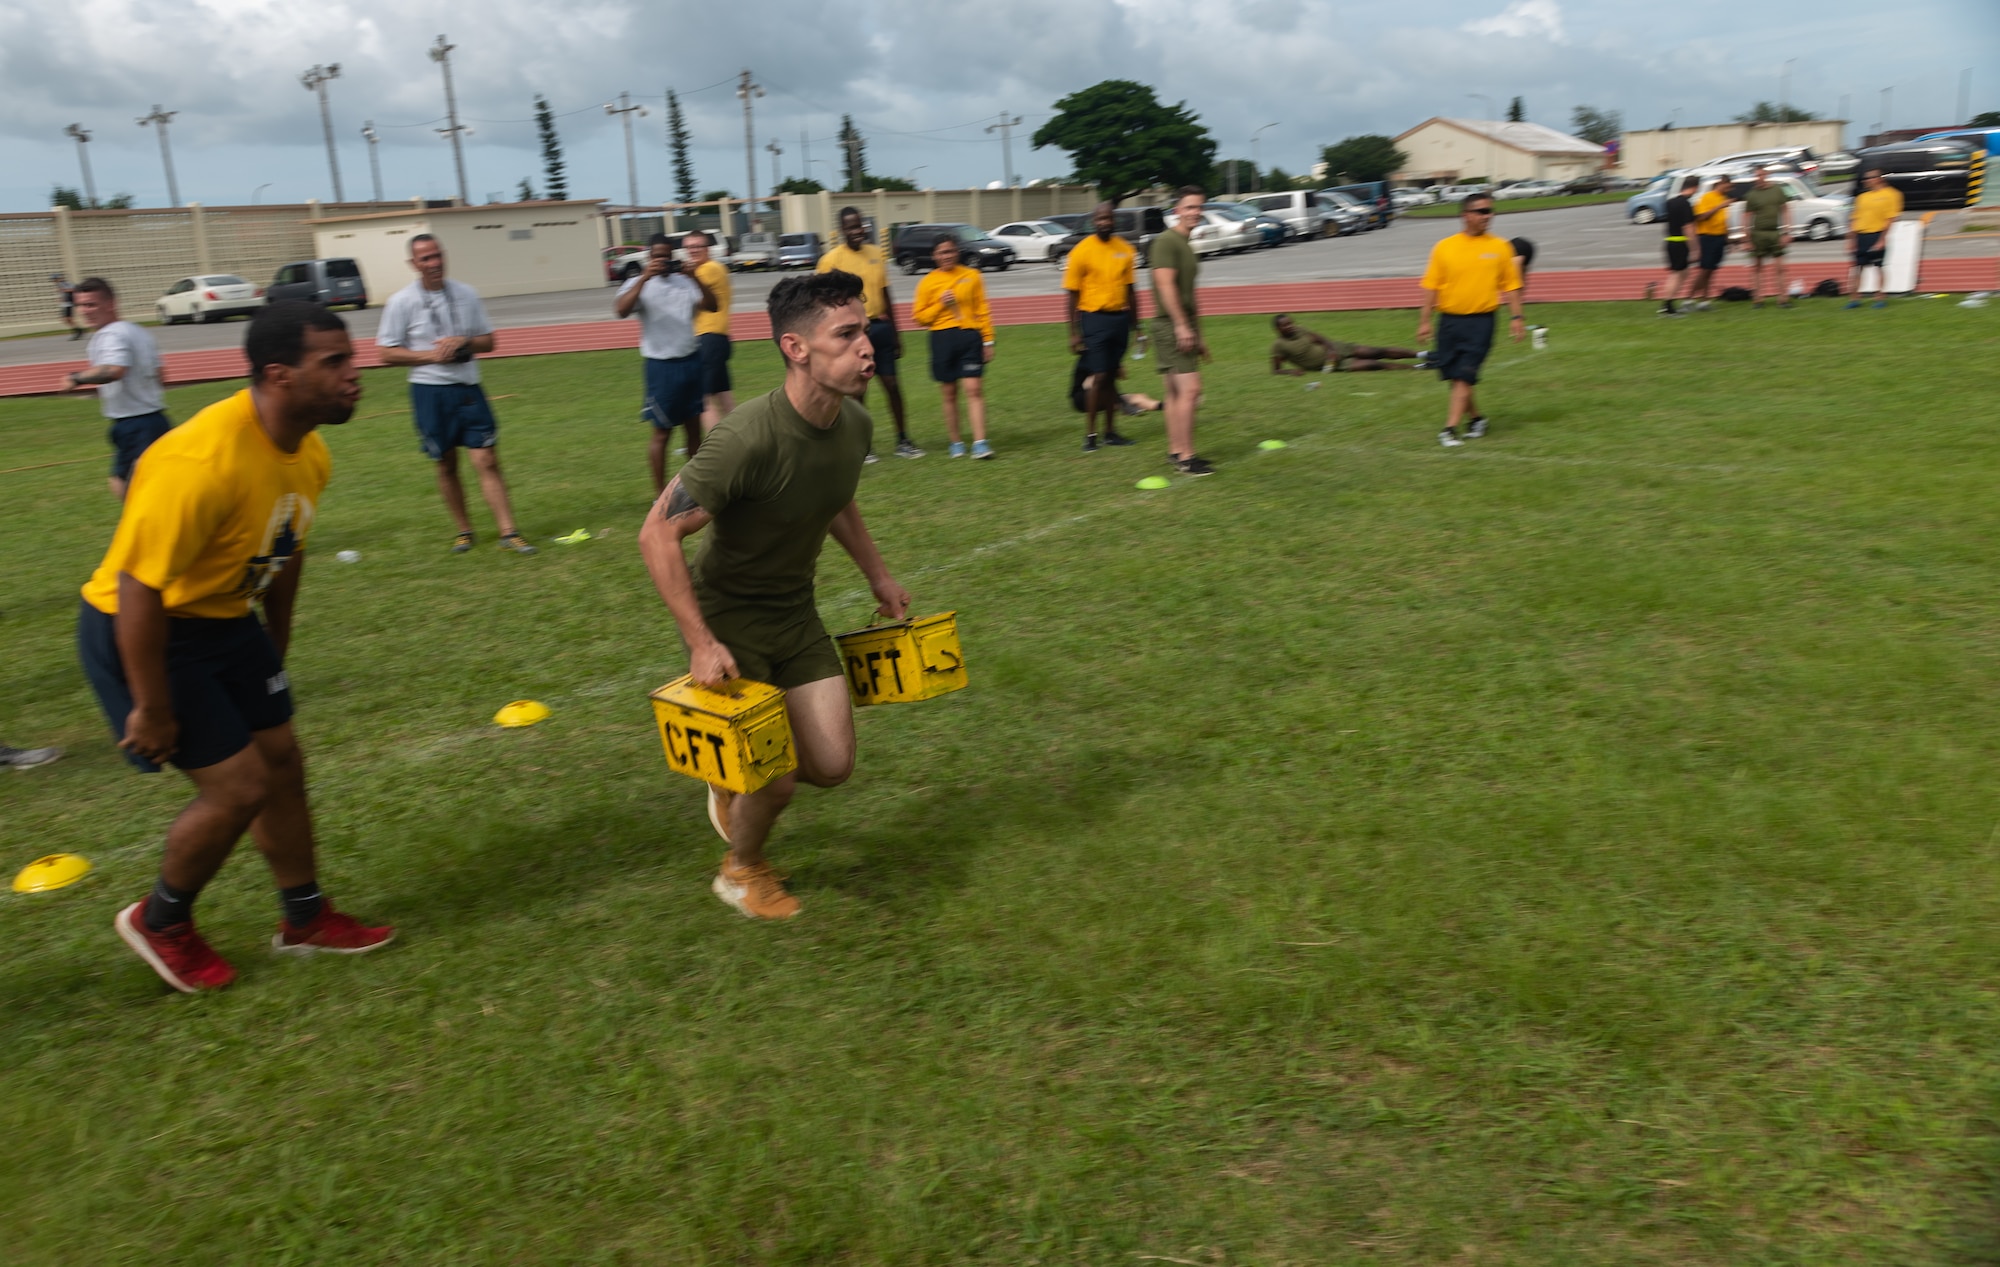 U.S. Navy Petty Officer 2nd Class Jesse Pedrero motivates U.S. Marine Corps Sgt. Cory Gargus, both Okinawa Joint Experience Green Team students, while he carries ammo cans during the Okinawa Joint Fitness Challenge Sept. 26, 2018, at Kadena Air Base, Japan. Service members from the Army, Navy, Air Force and Marine Corps were equally broken up into four classes to provide a joint learning environment. (U.S. Air Force photo by Staff Sgt. Micaiah Anthony)